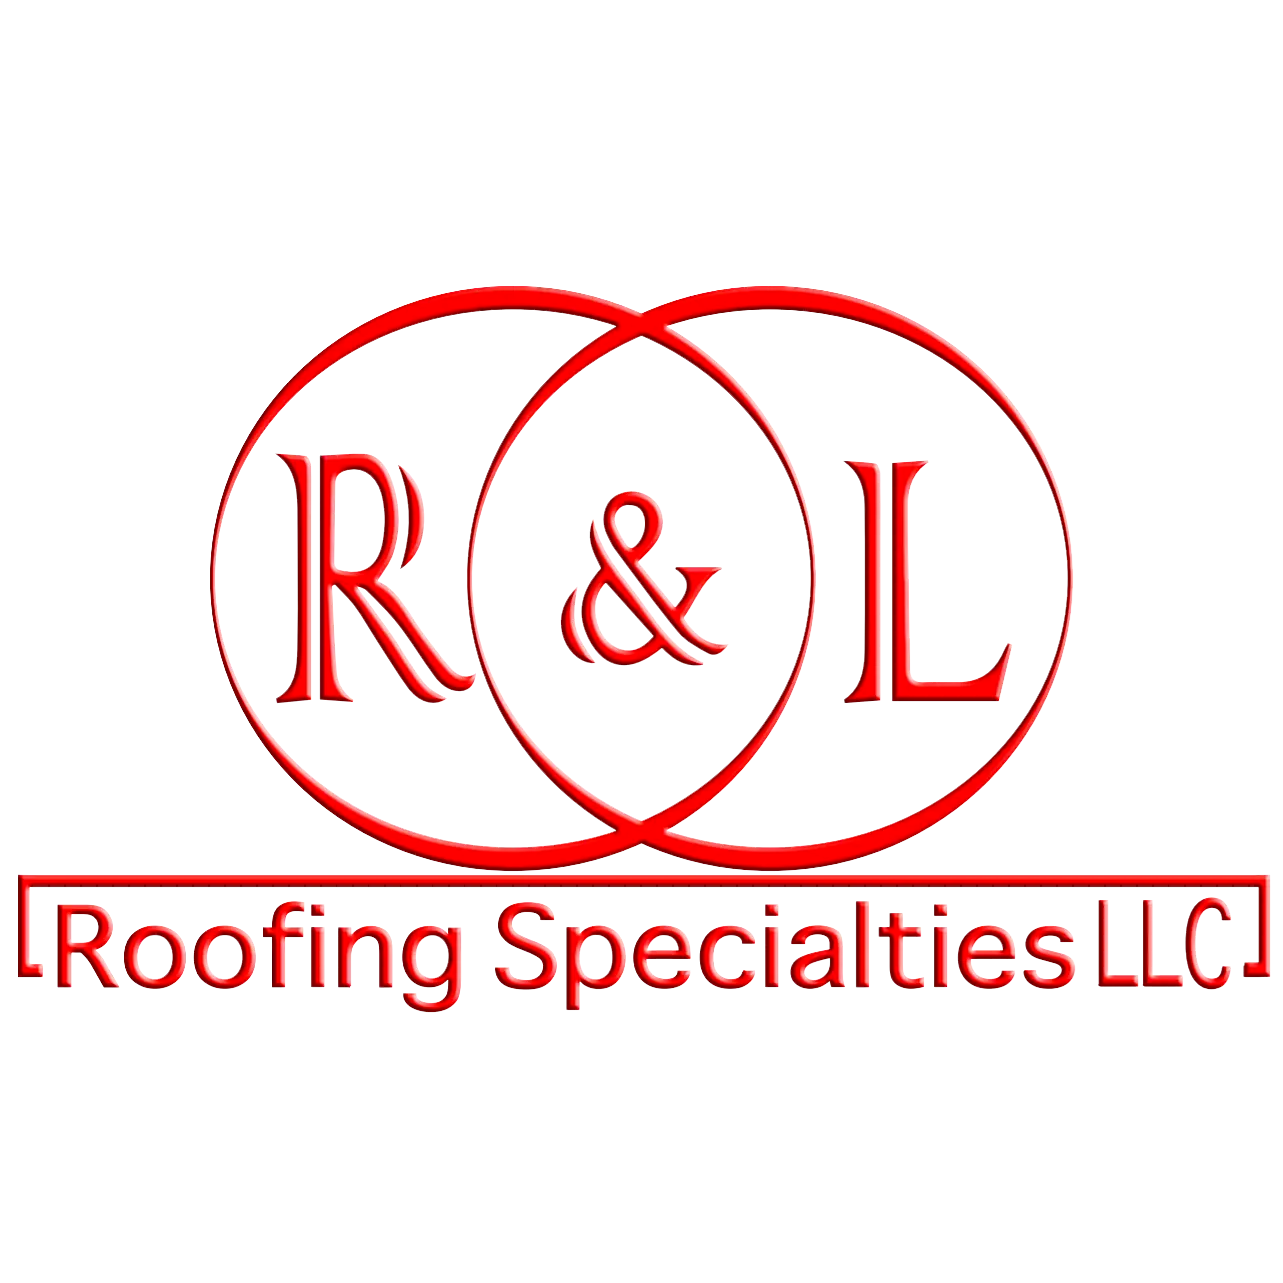 R&L Roofing Specialties - Manor, TX 78653 - (512)550-4486 | ShowMeLocal.com